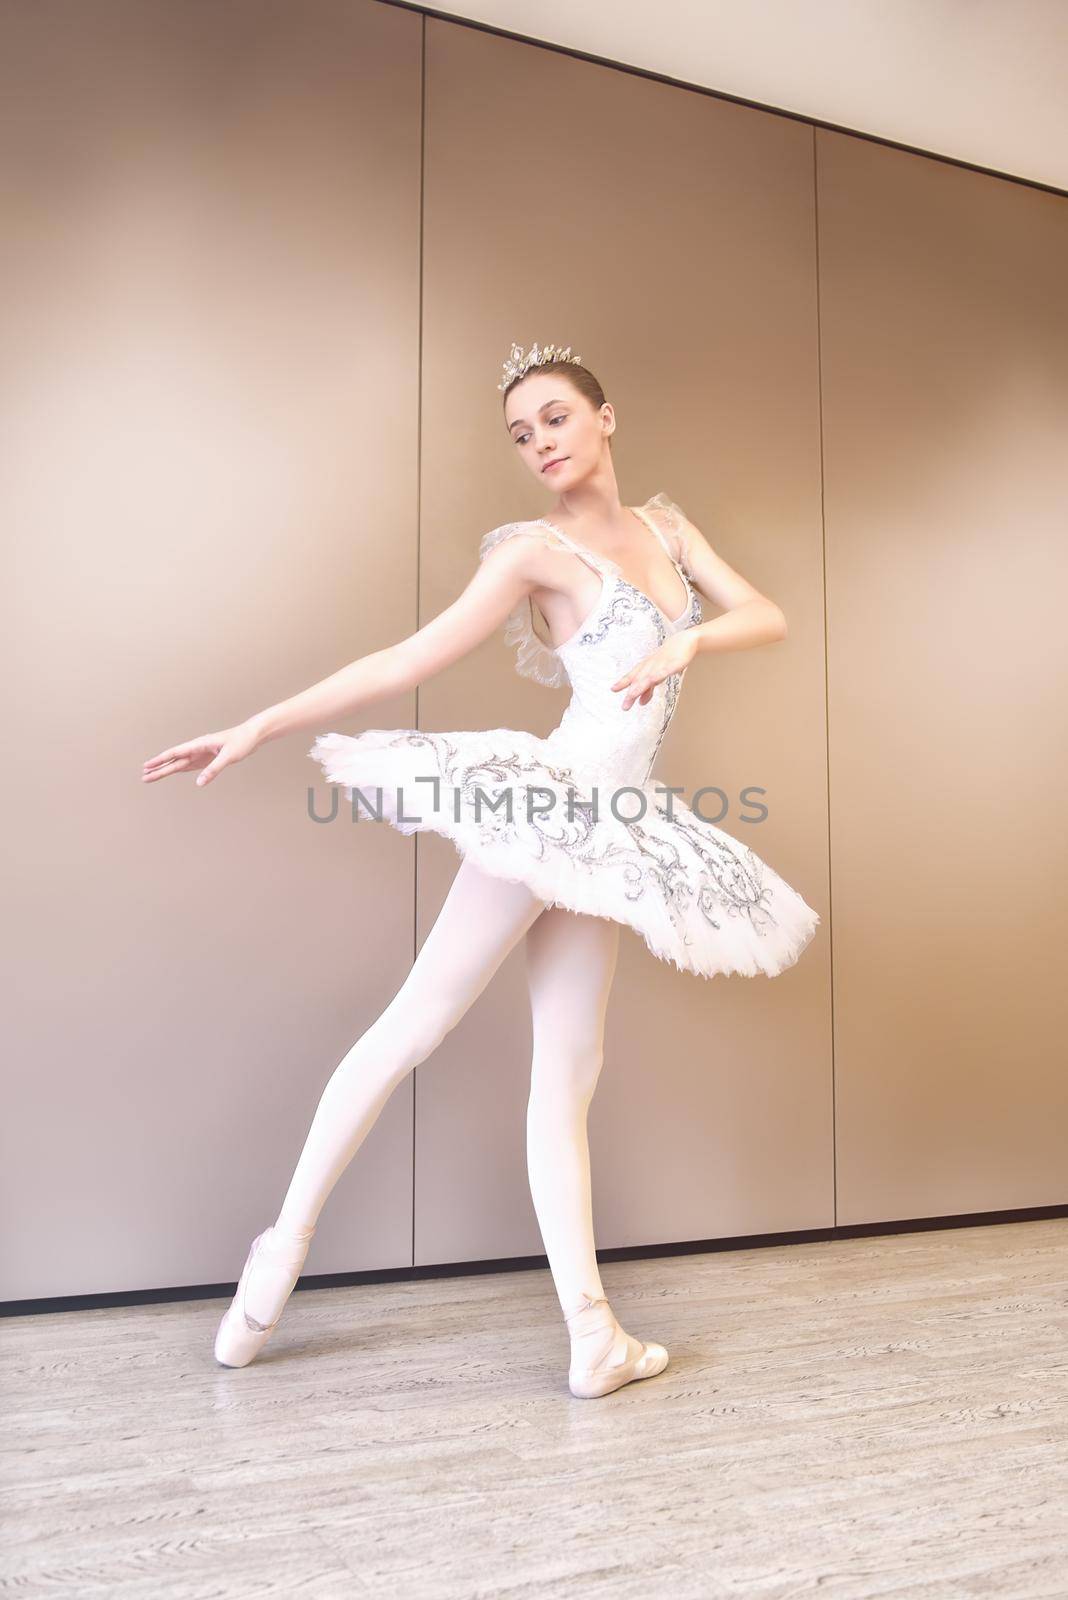 young caucasian ballet dancer practice ballet positions in professional tutu skirt of white swan. young beautiful woman ballet dancer in tutu practice ballet positions